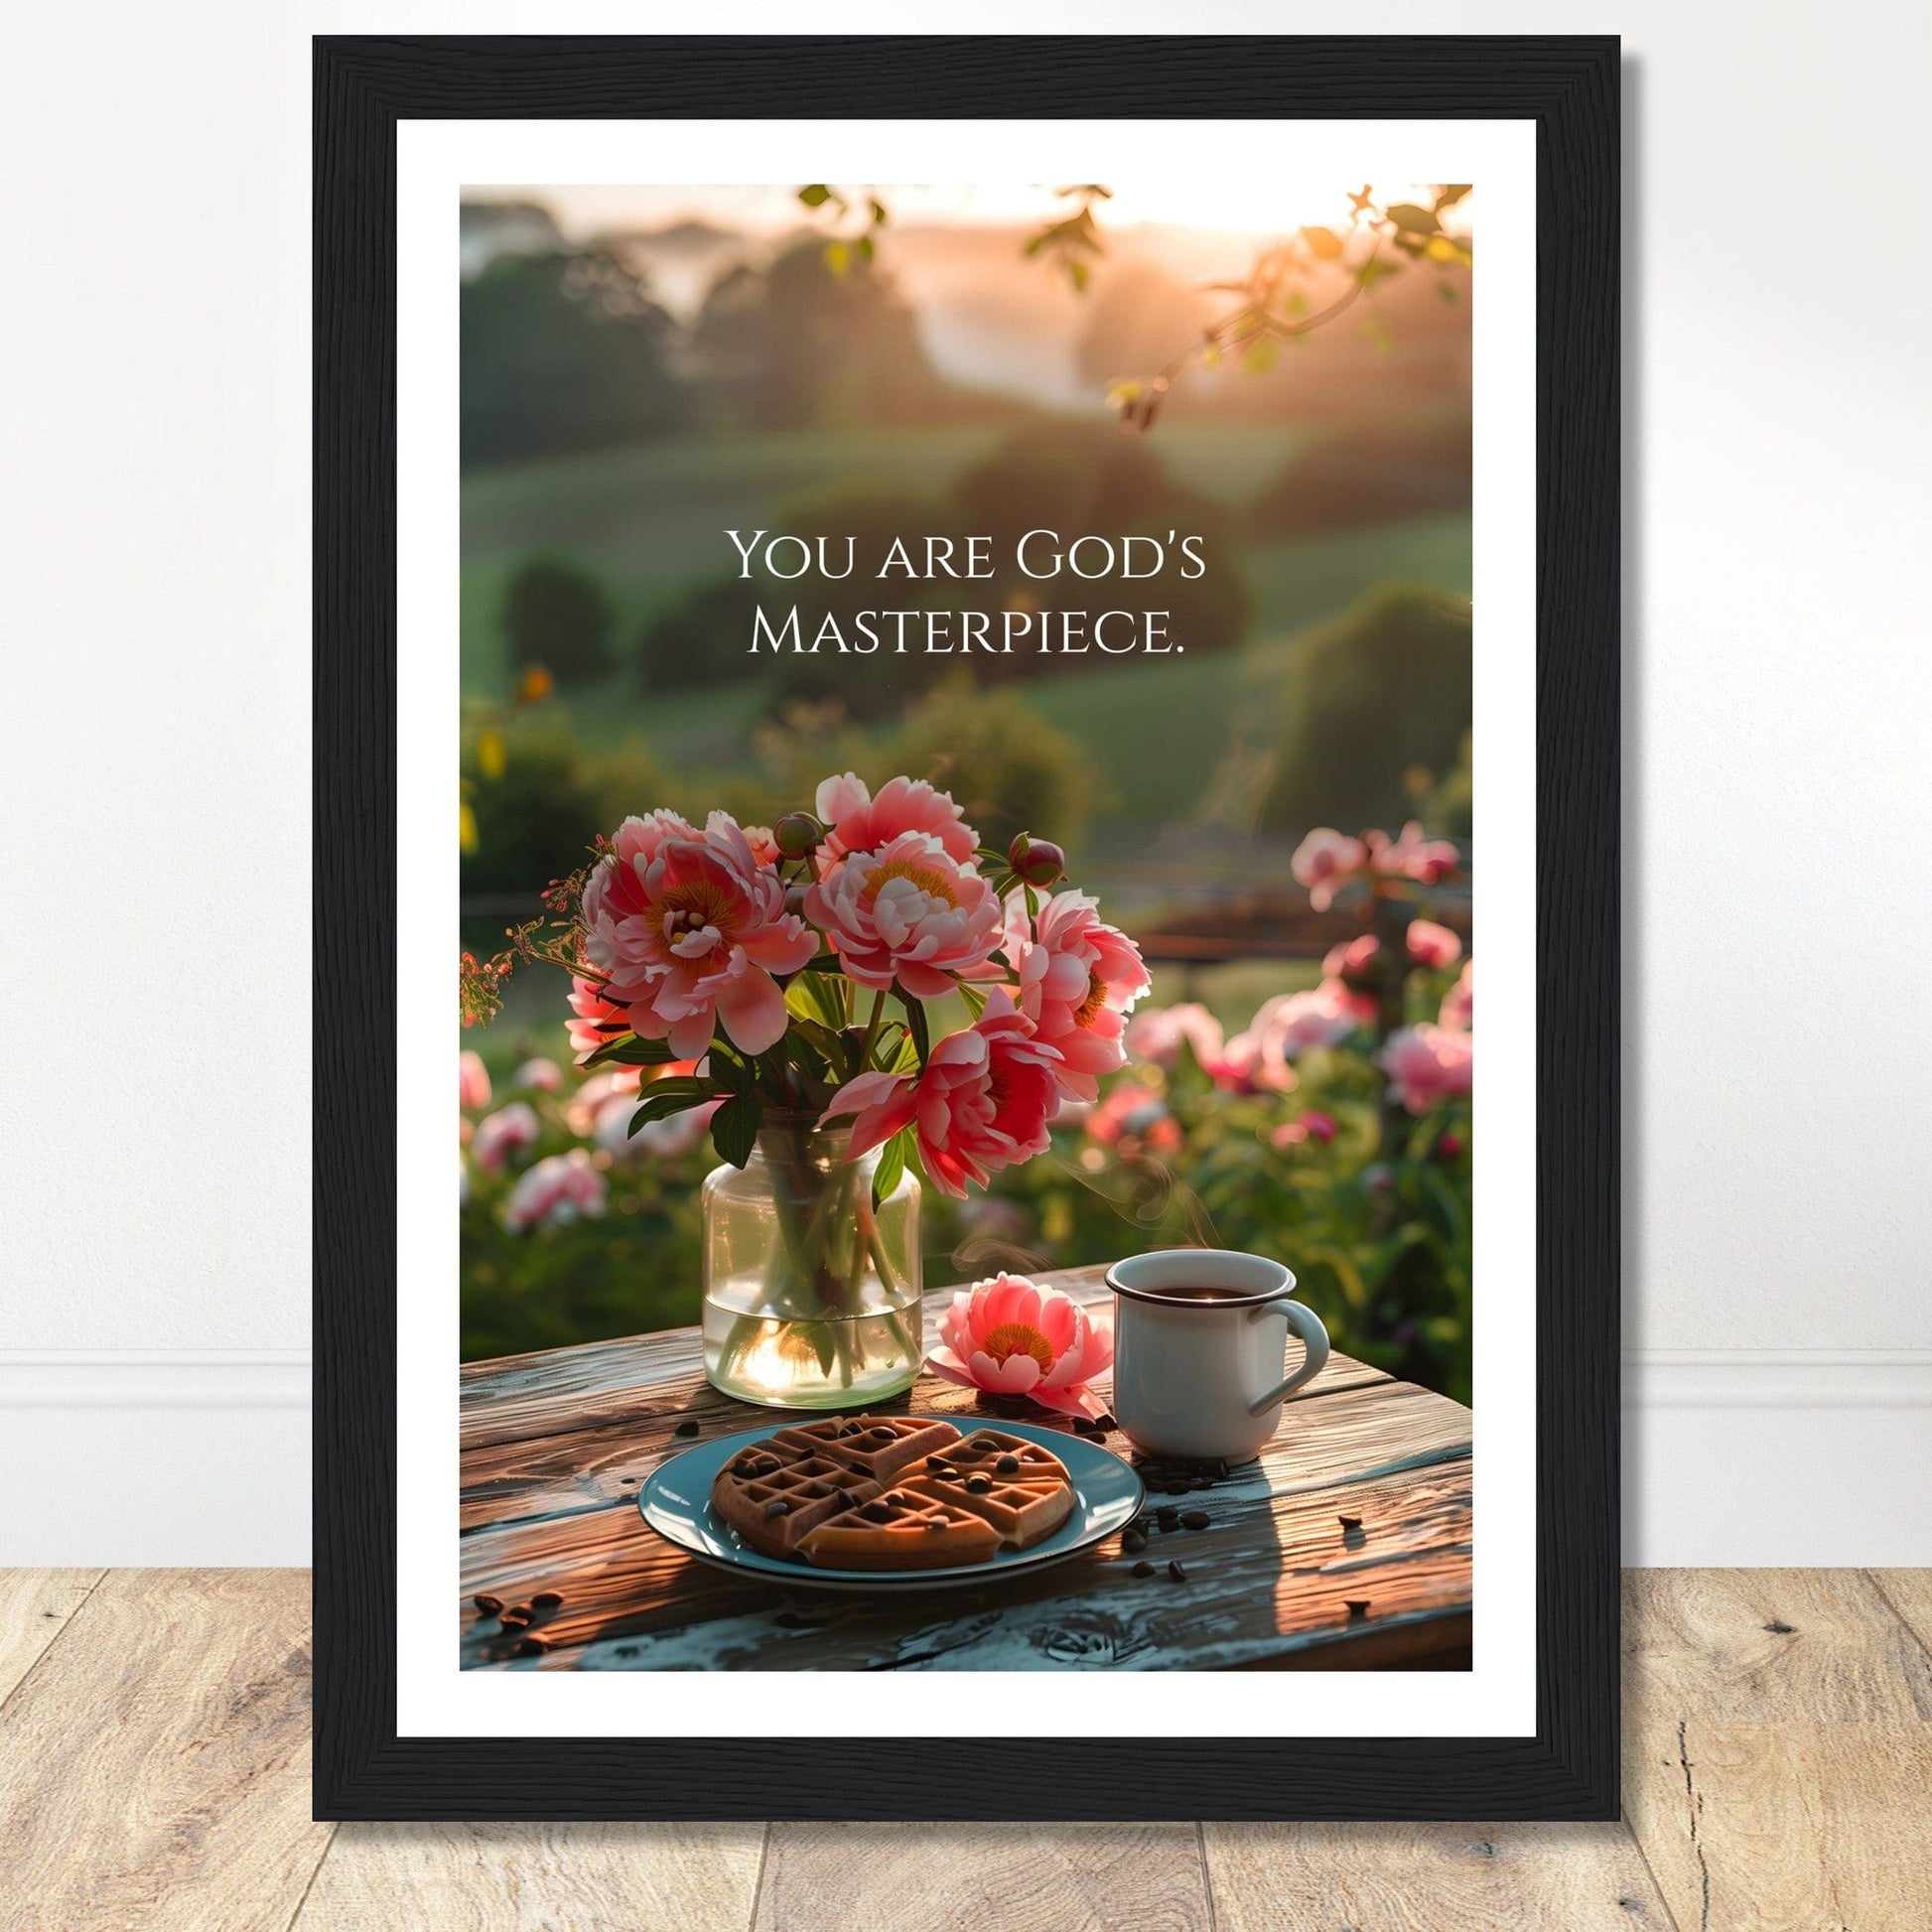 Coffee With My Father Print Material A4 21x29.7 cm / 8x12″ / Black frame Framed Template